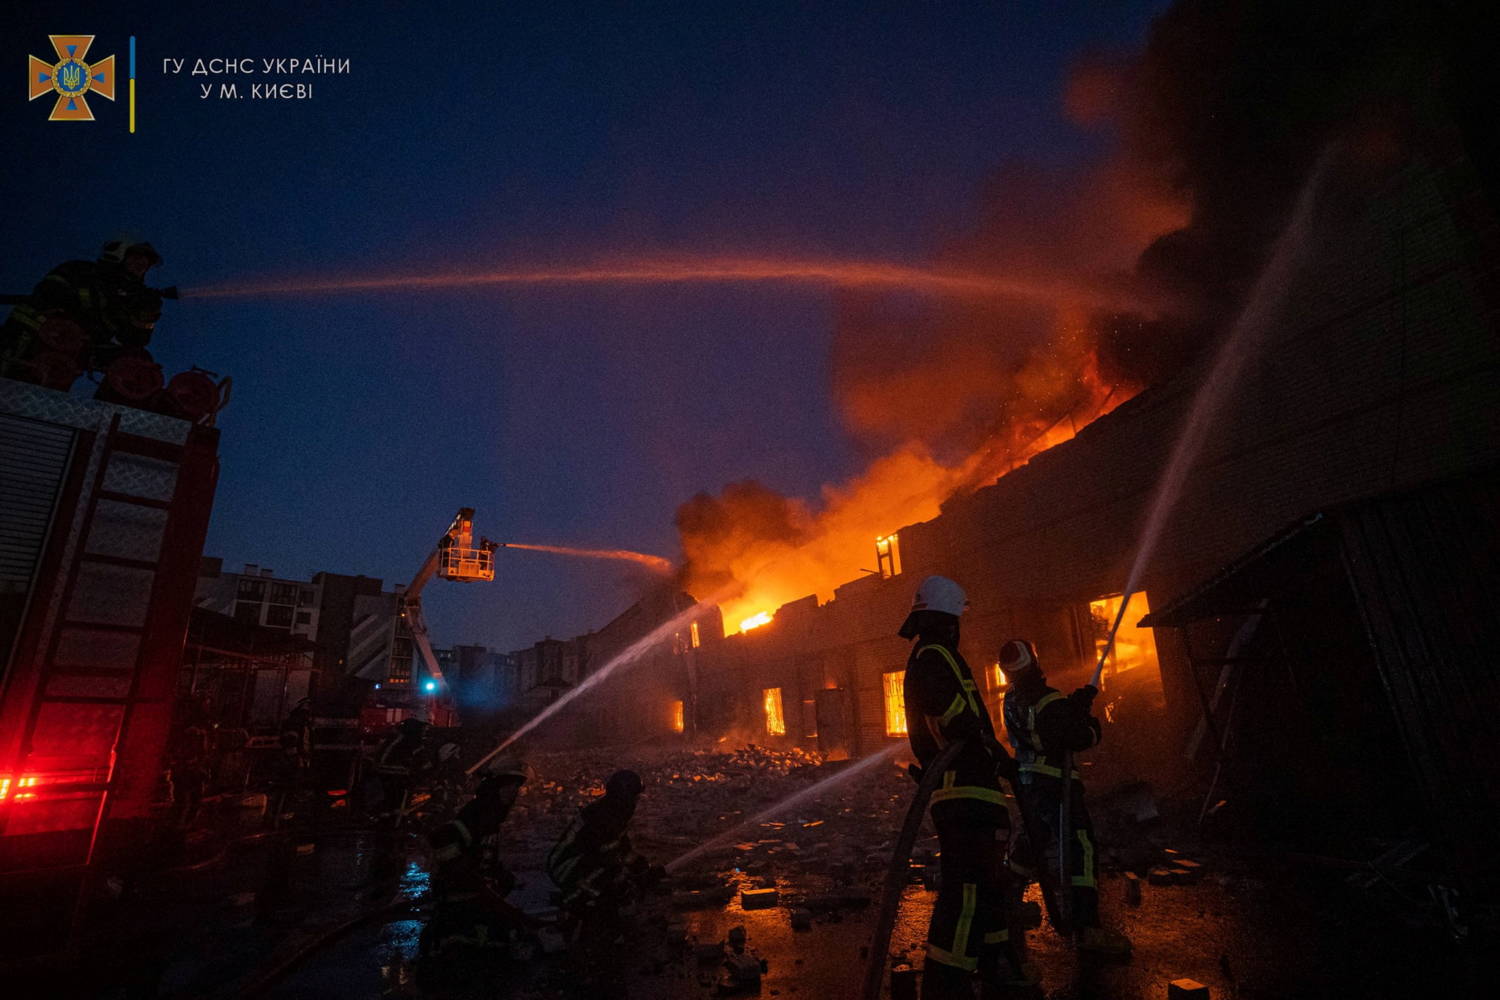 Rescuers Work At A Site Of Buildings Damaged By A Shelling In Kyiv